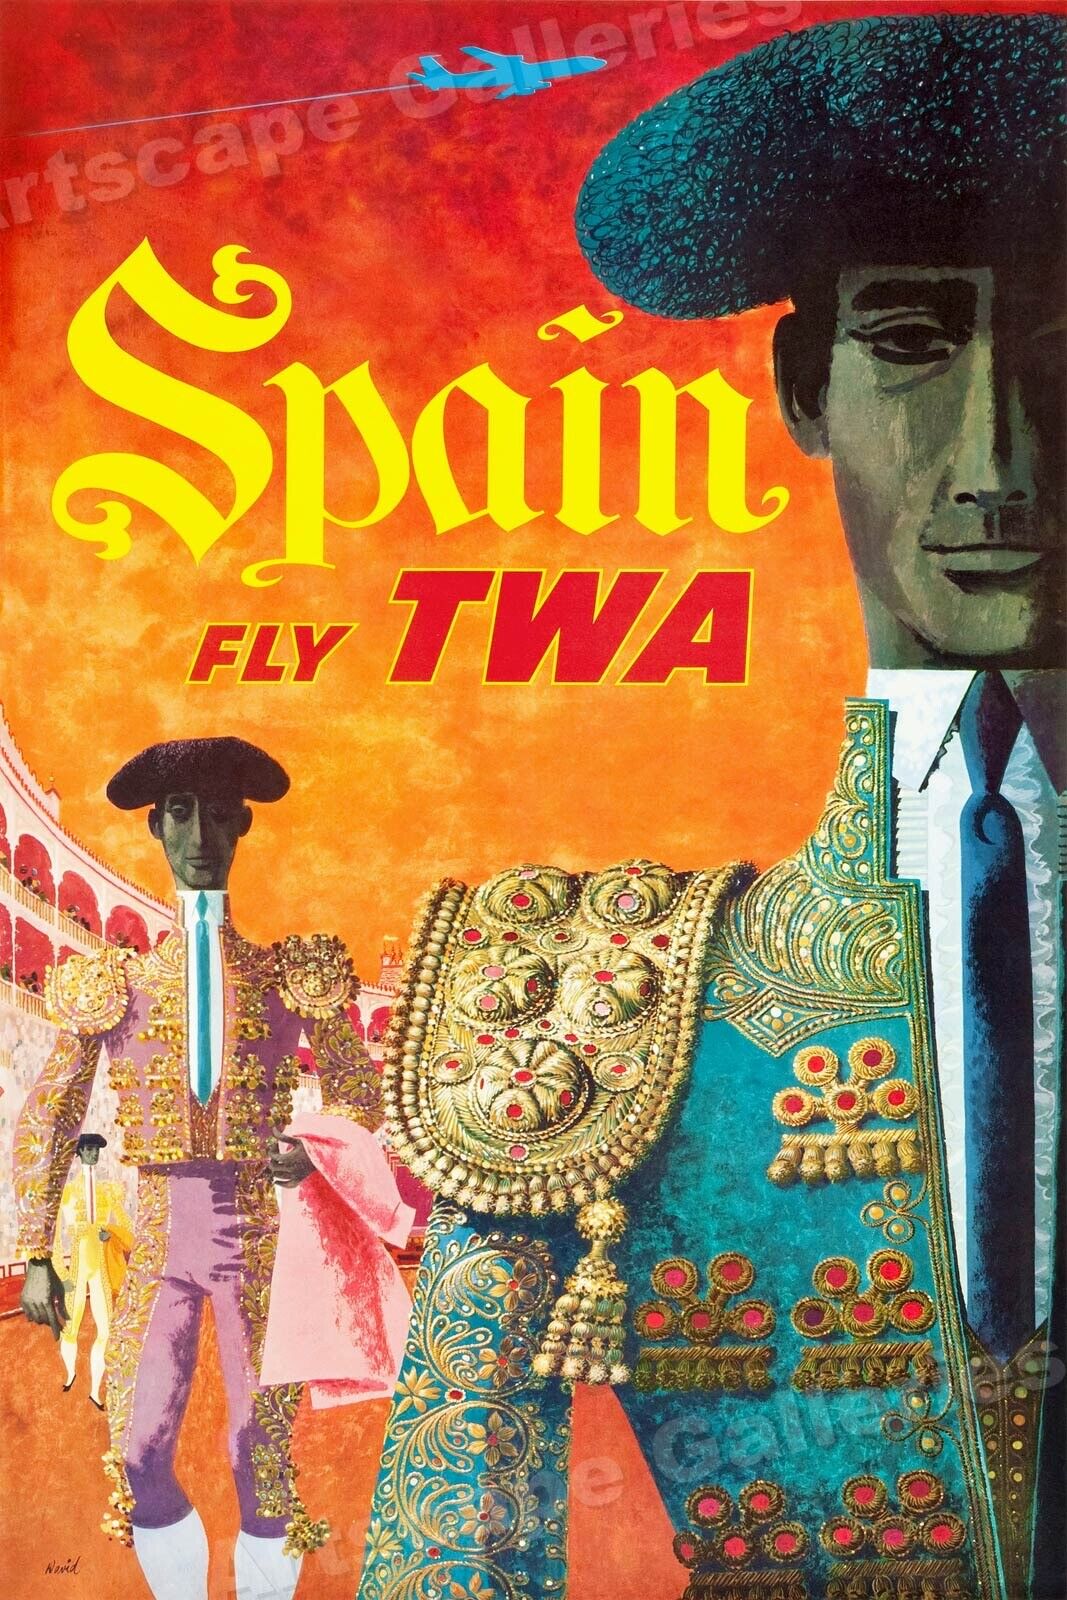 1960 Spain Fly TWA Bullfighter Vintage Style Travel Poster - 20x30